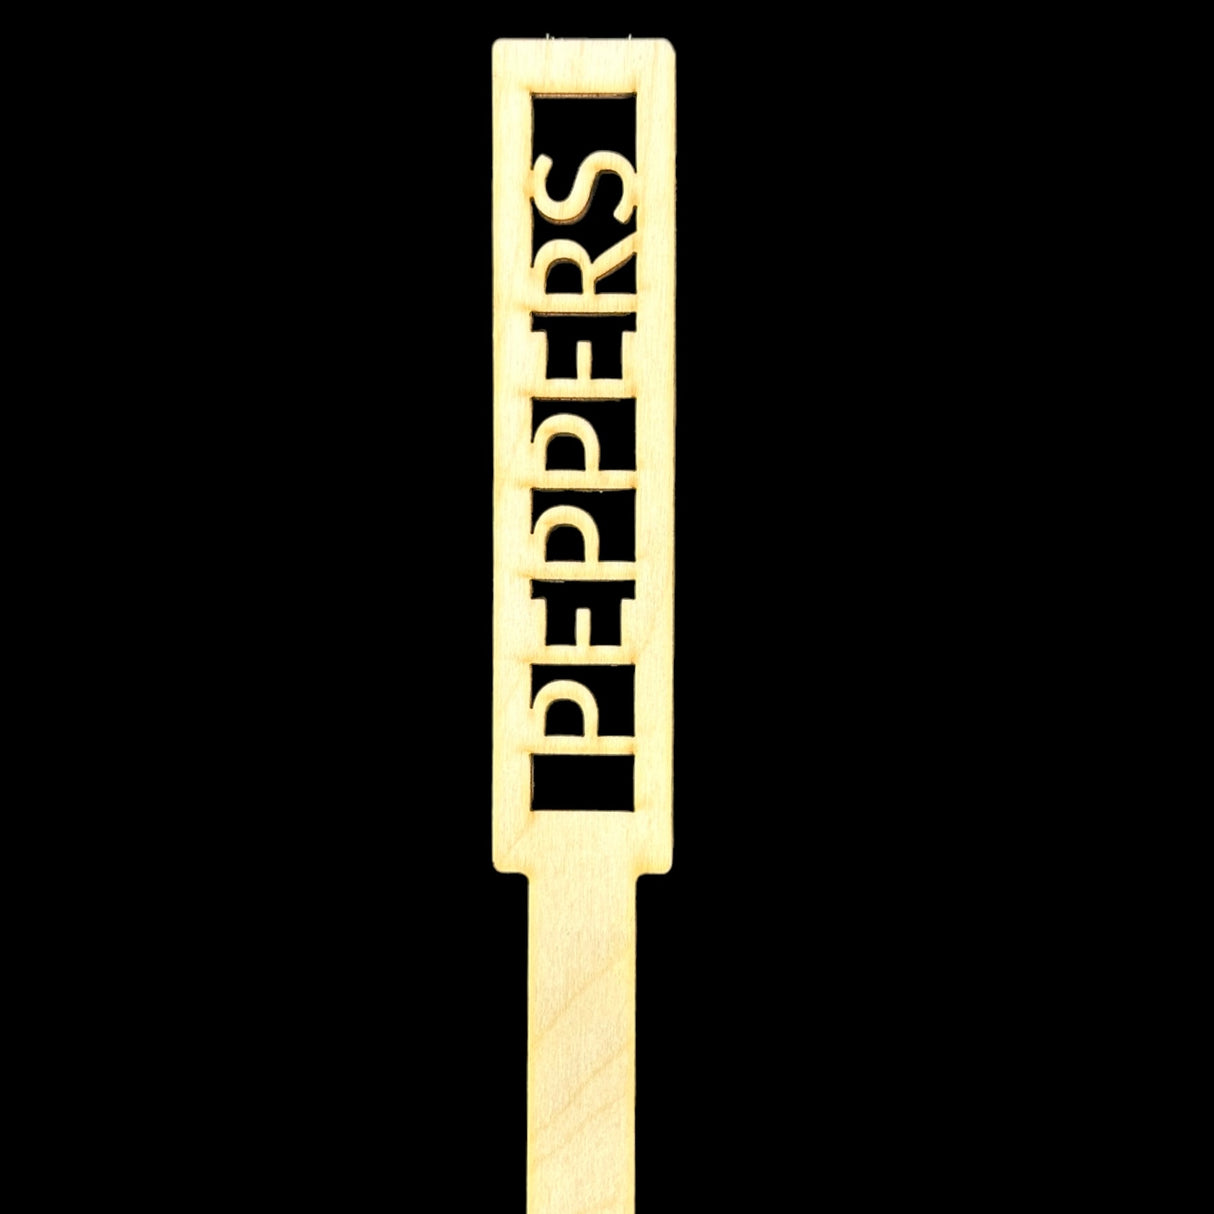 Custom Garden Stakes for Plant and Bed Labeling